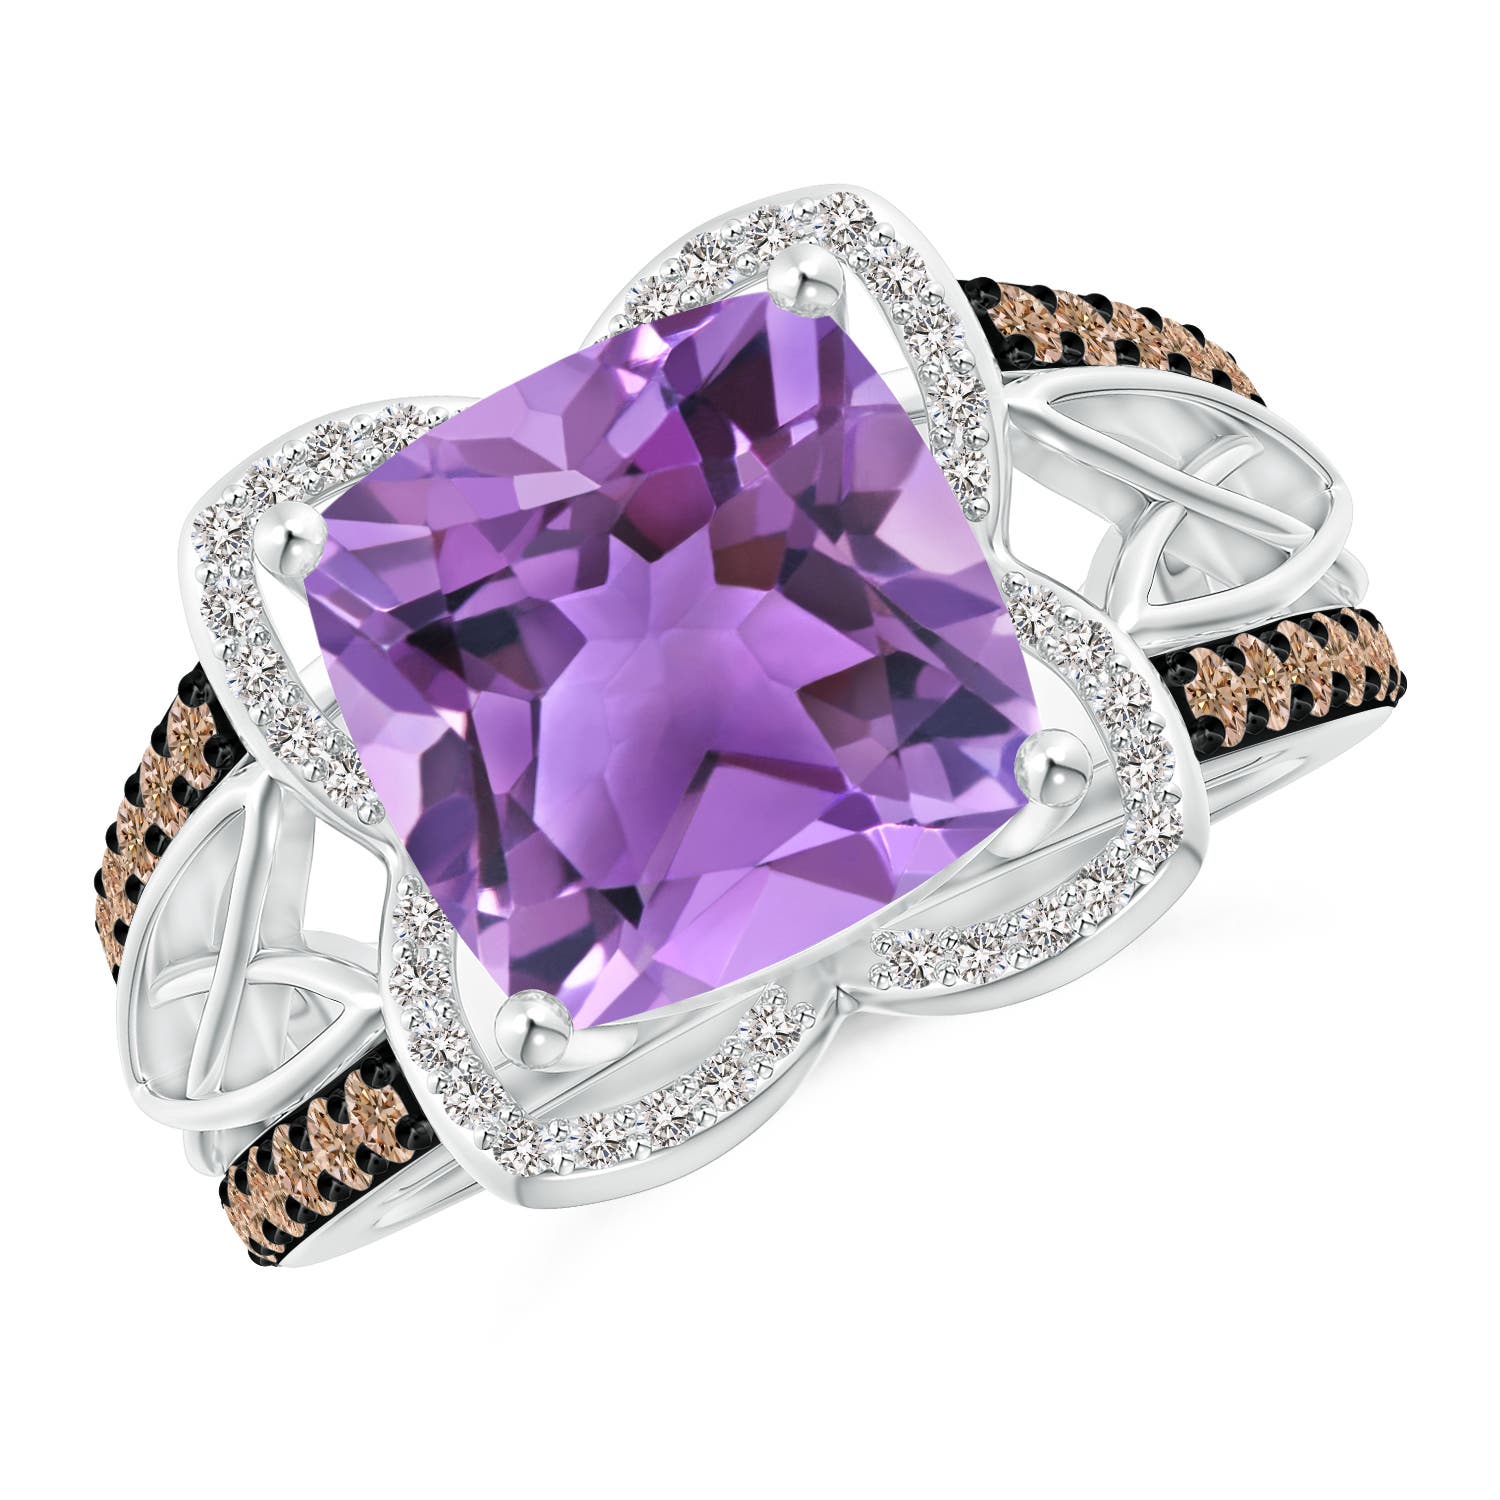 AA - Amethyst / 4.41 CT / 14 KT White Gold